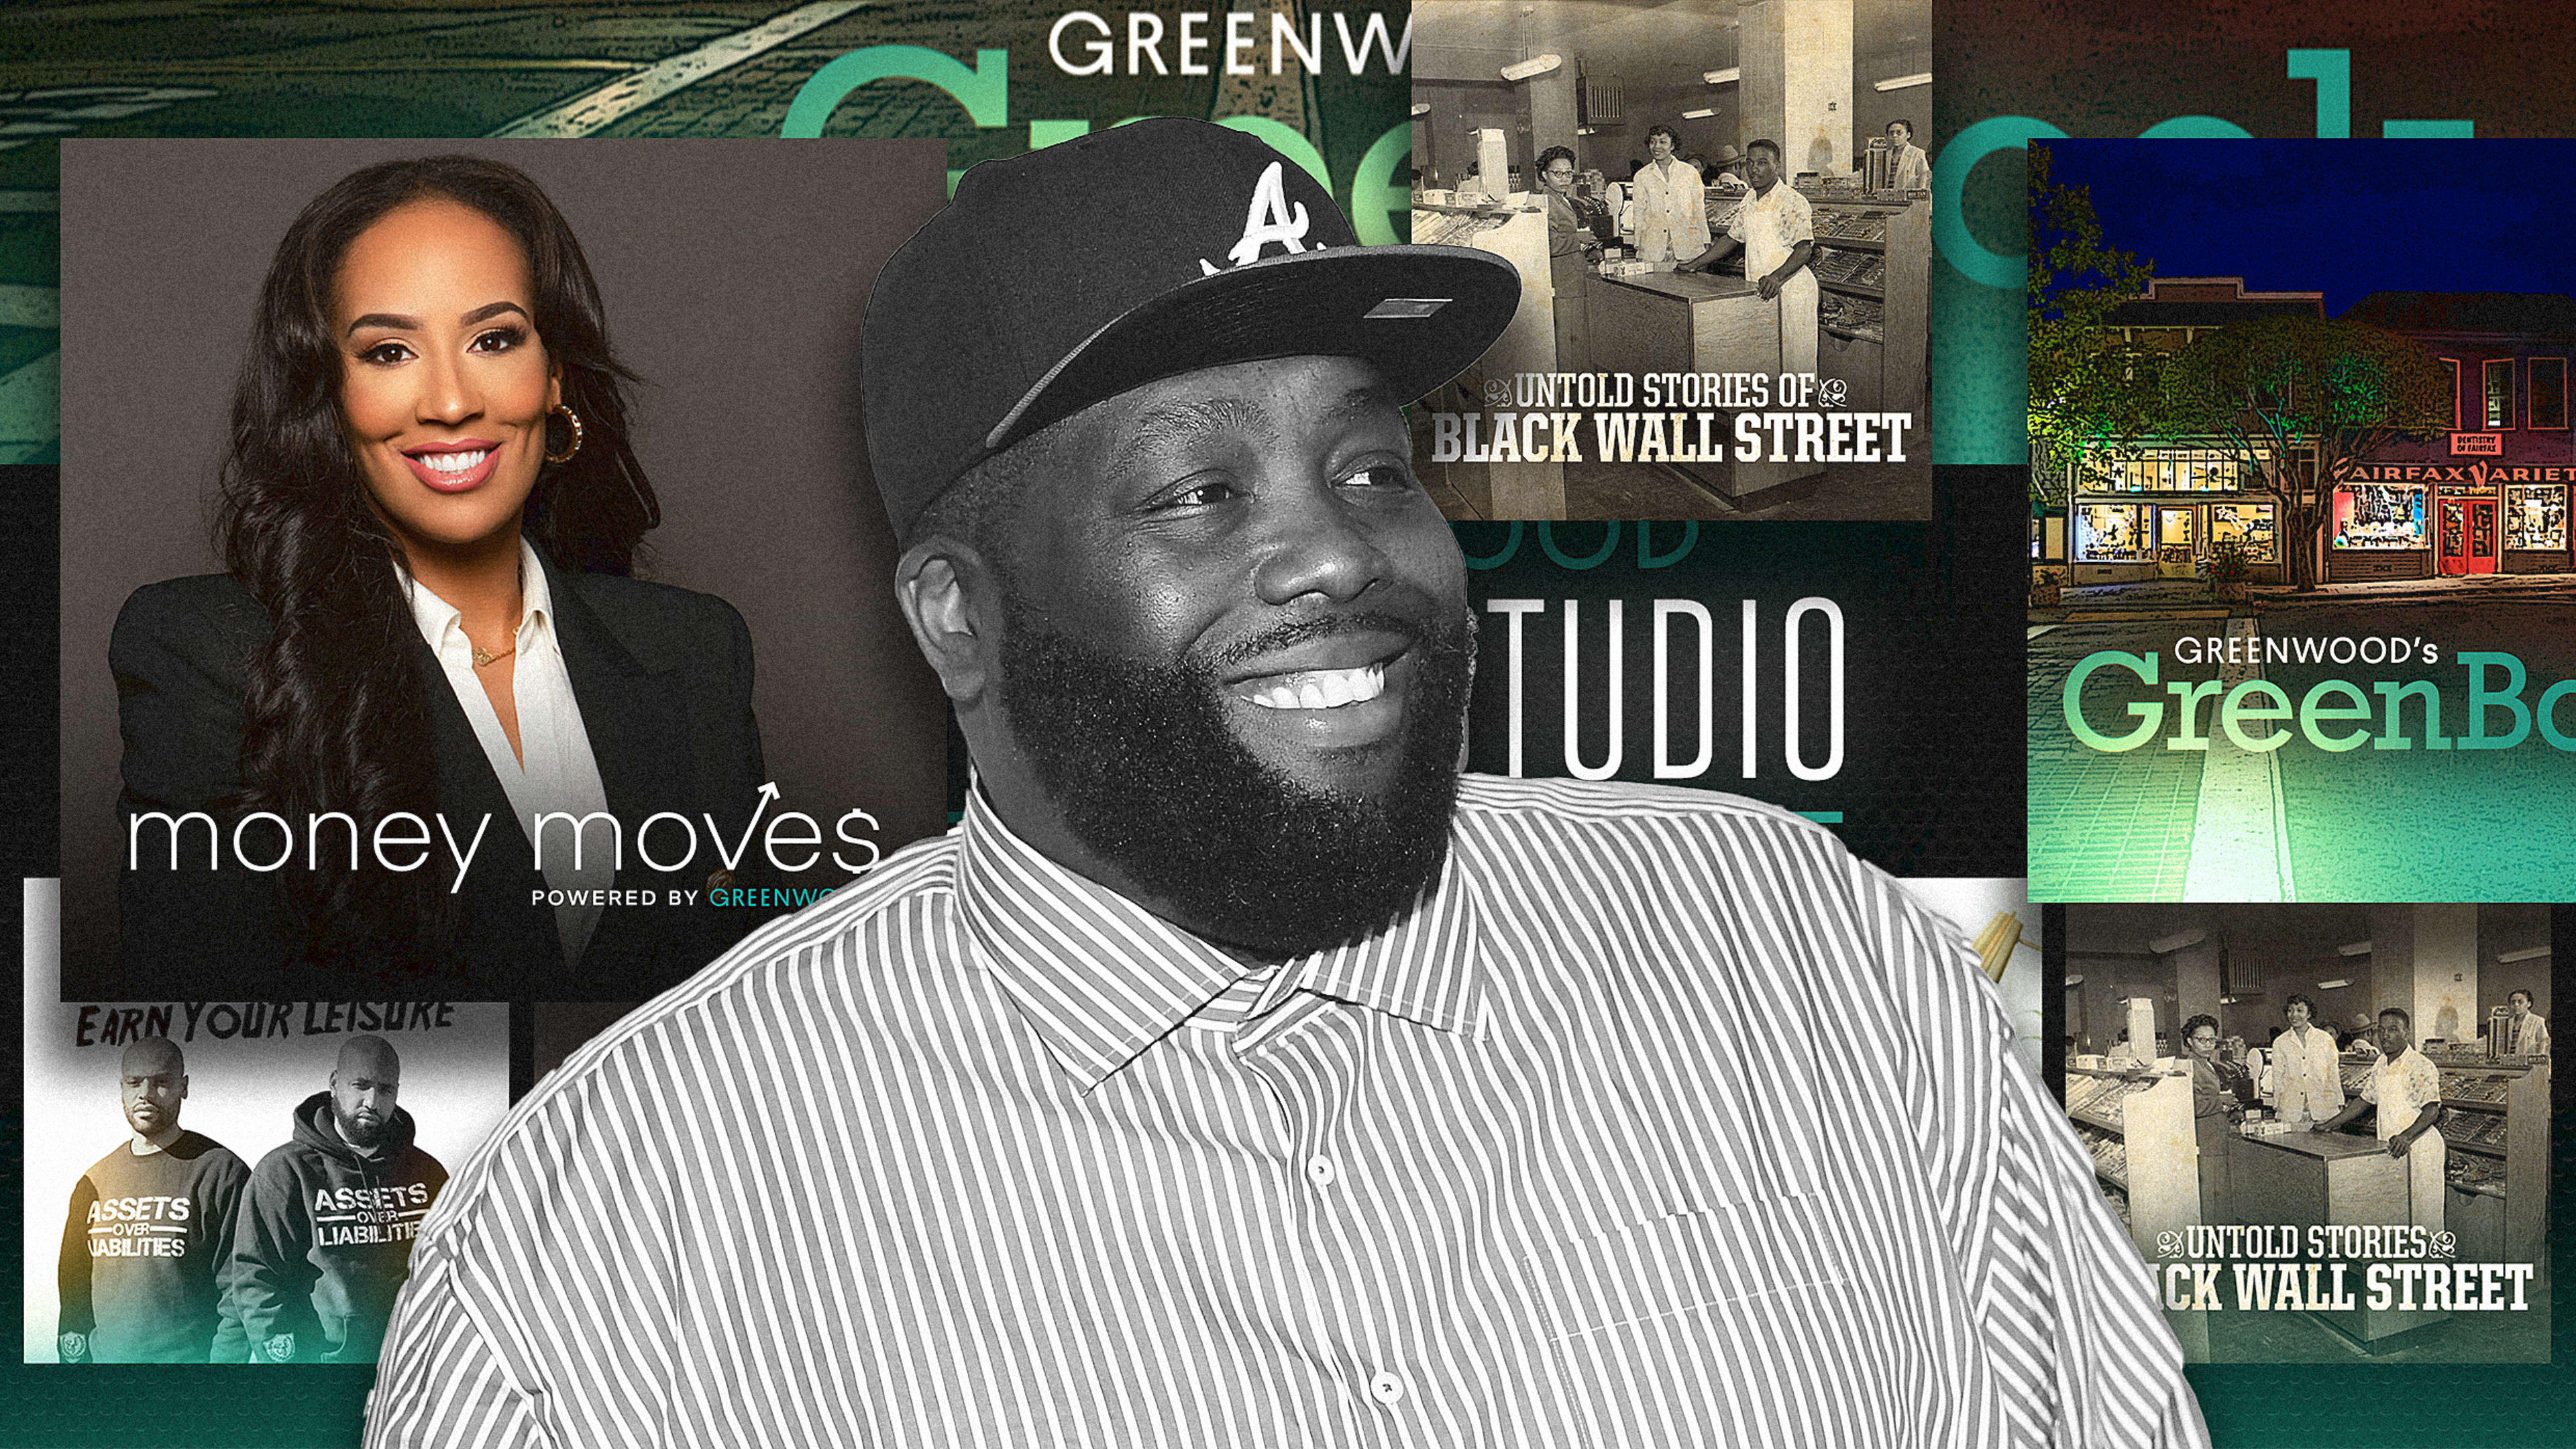 America’s financial institutions have failed Black and brown communities. Killer Mike has a solution